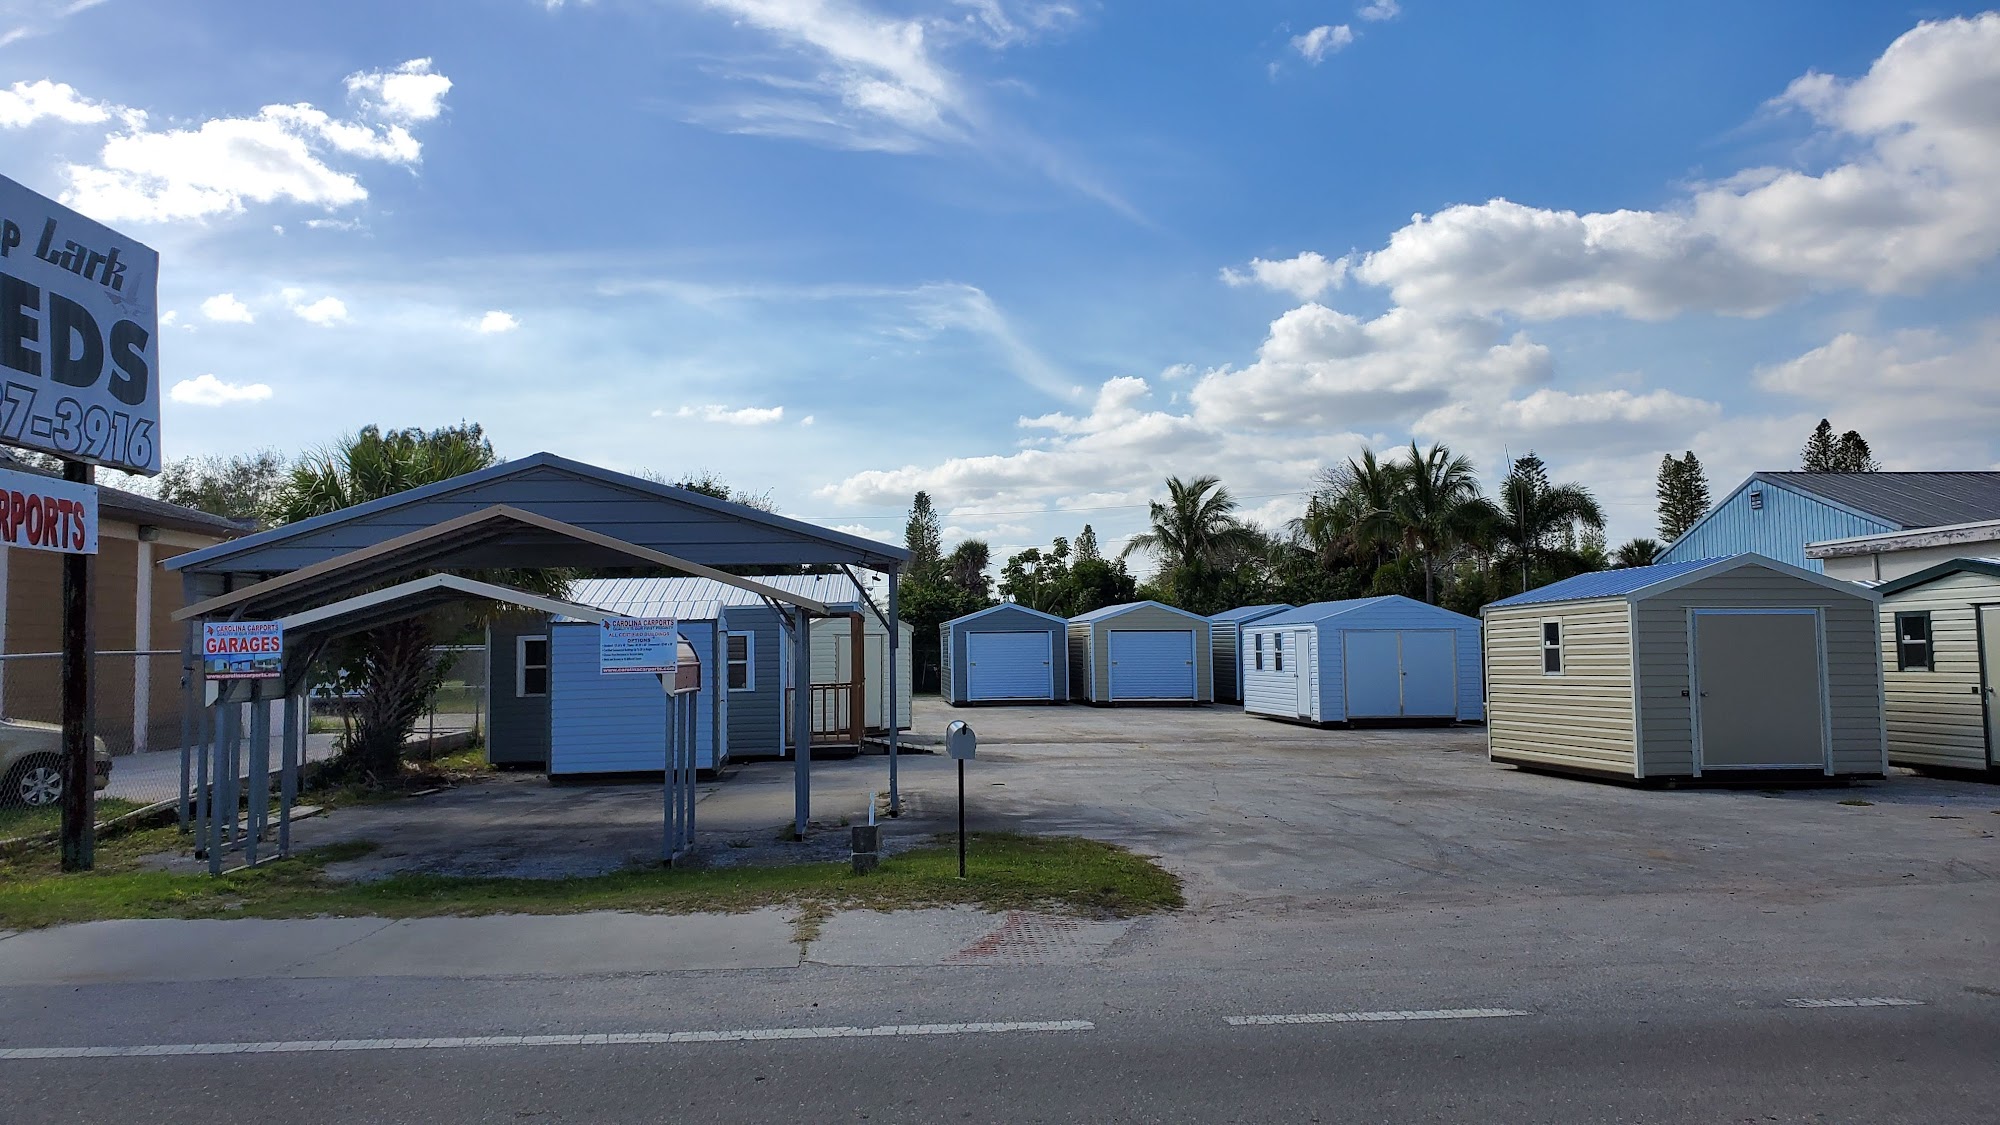 The Shed Shop - Hobe Sound